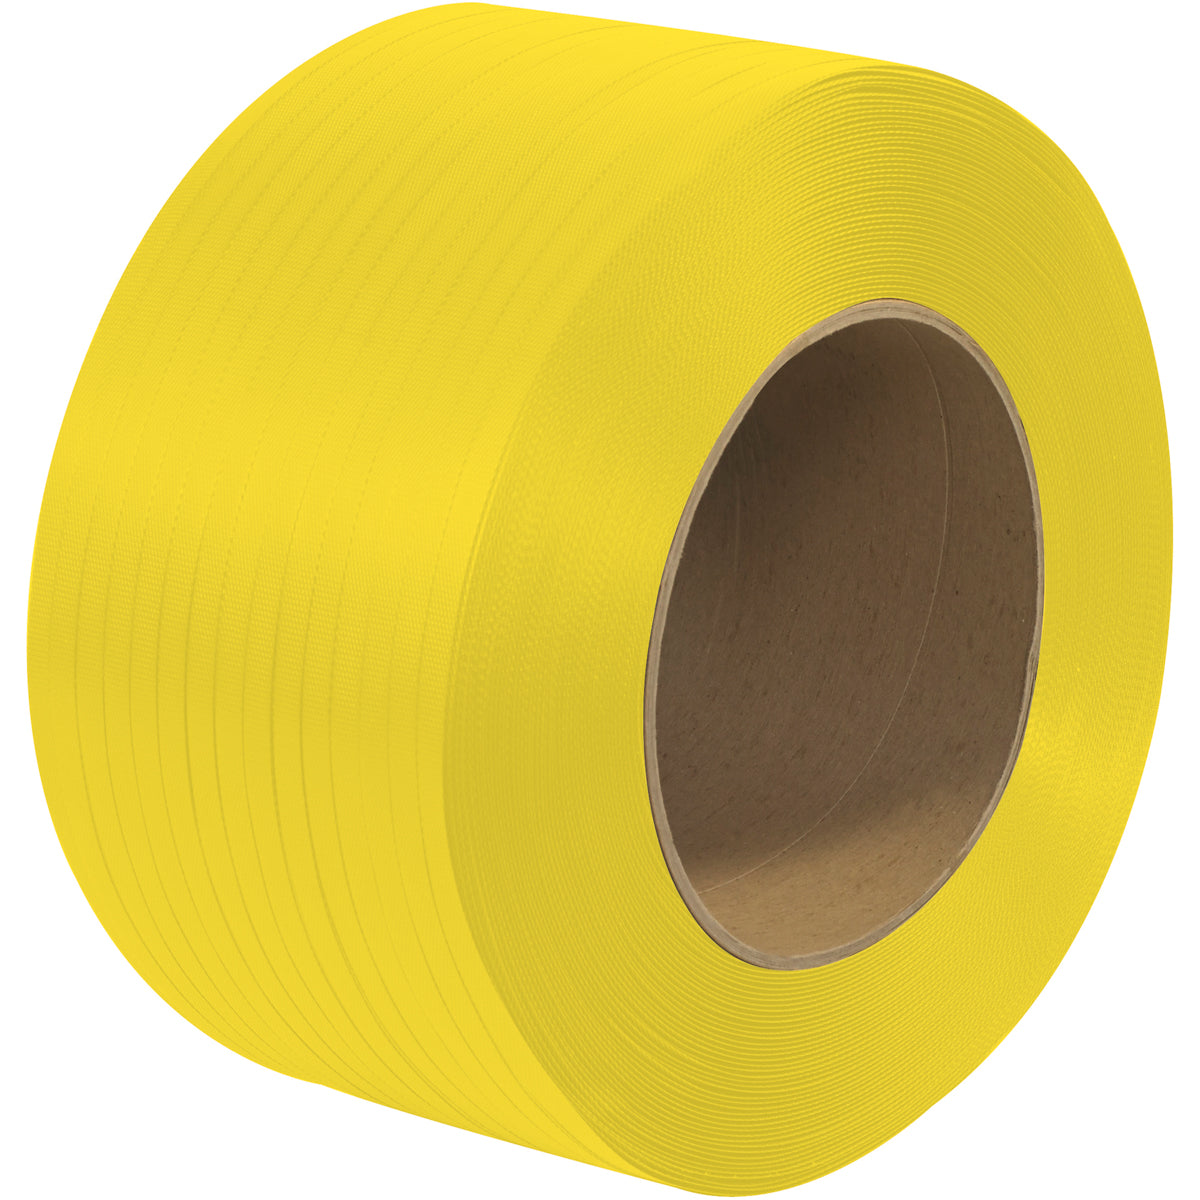 Polypropylene & Polyester Strapping : All you need to know